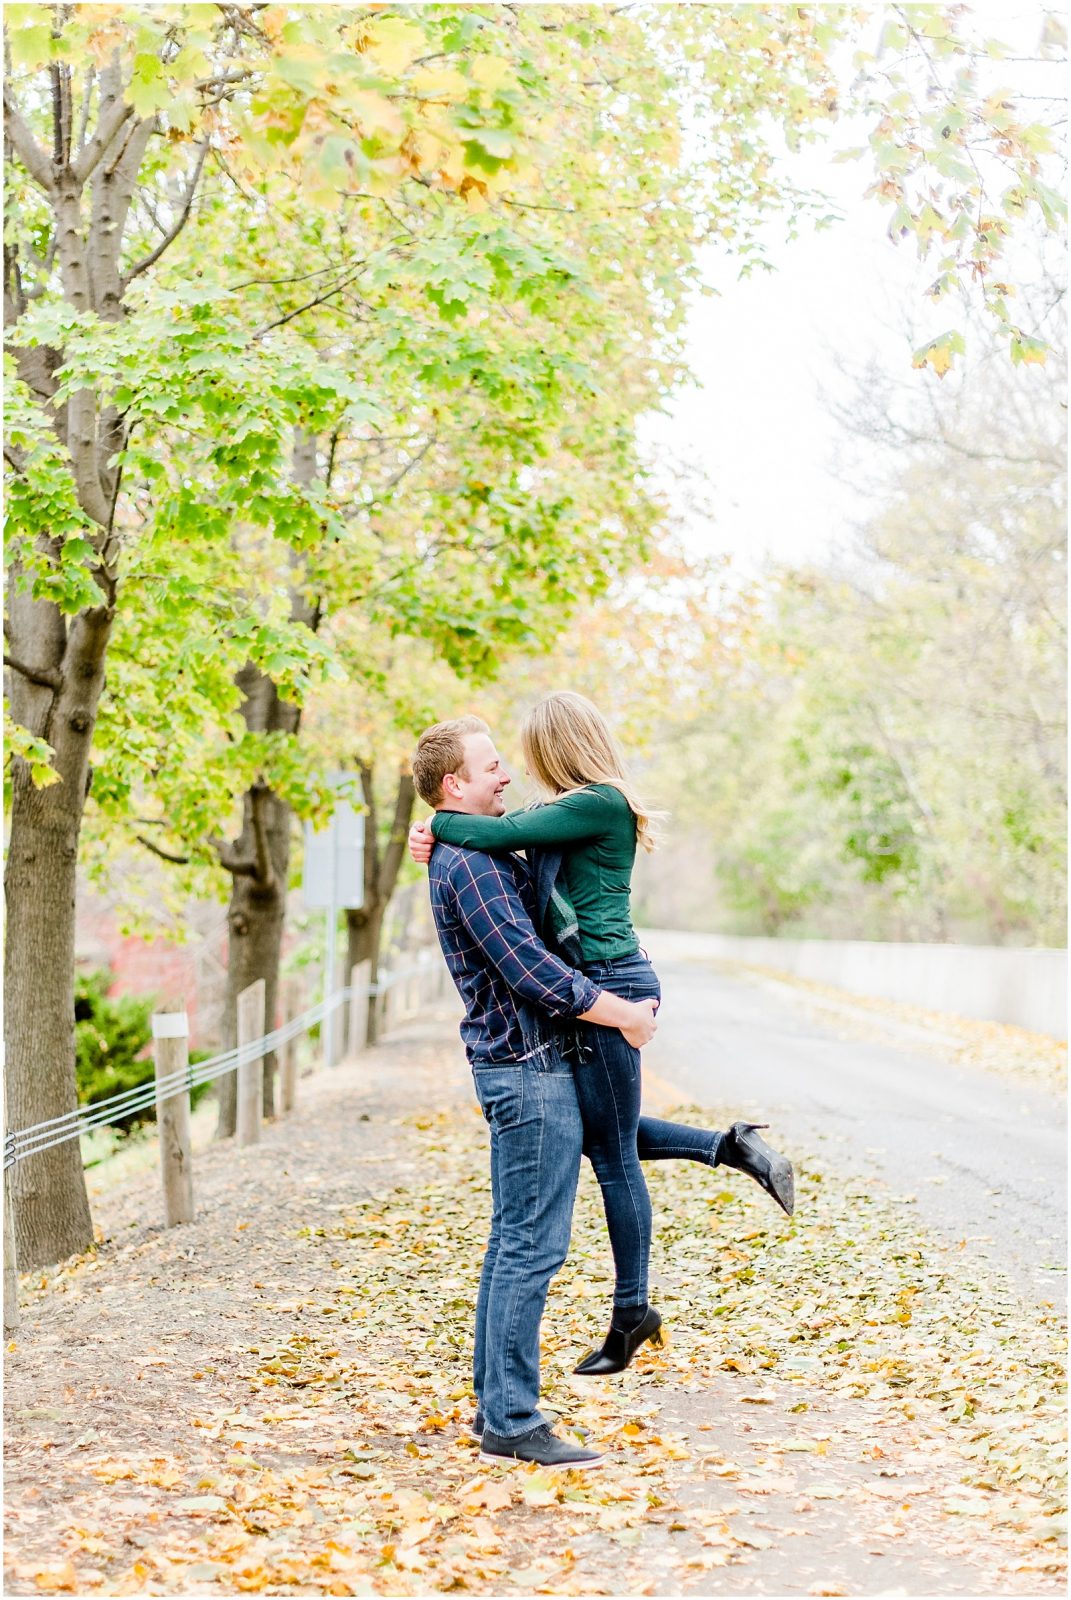 Lorne Park Brantford Engagement Session couple kissing in the fall leaves